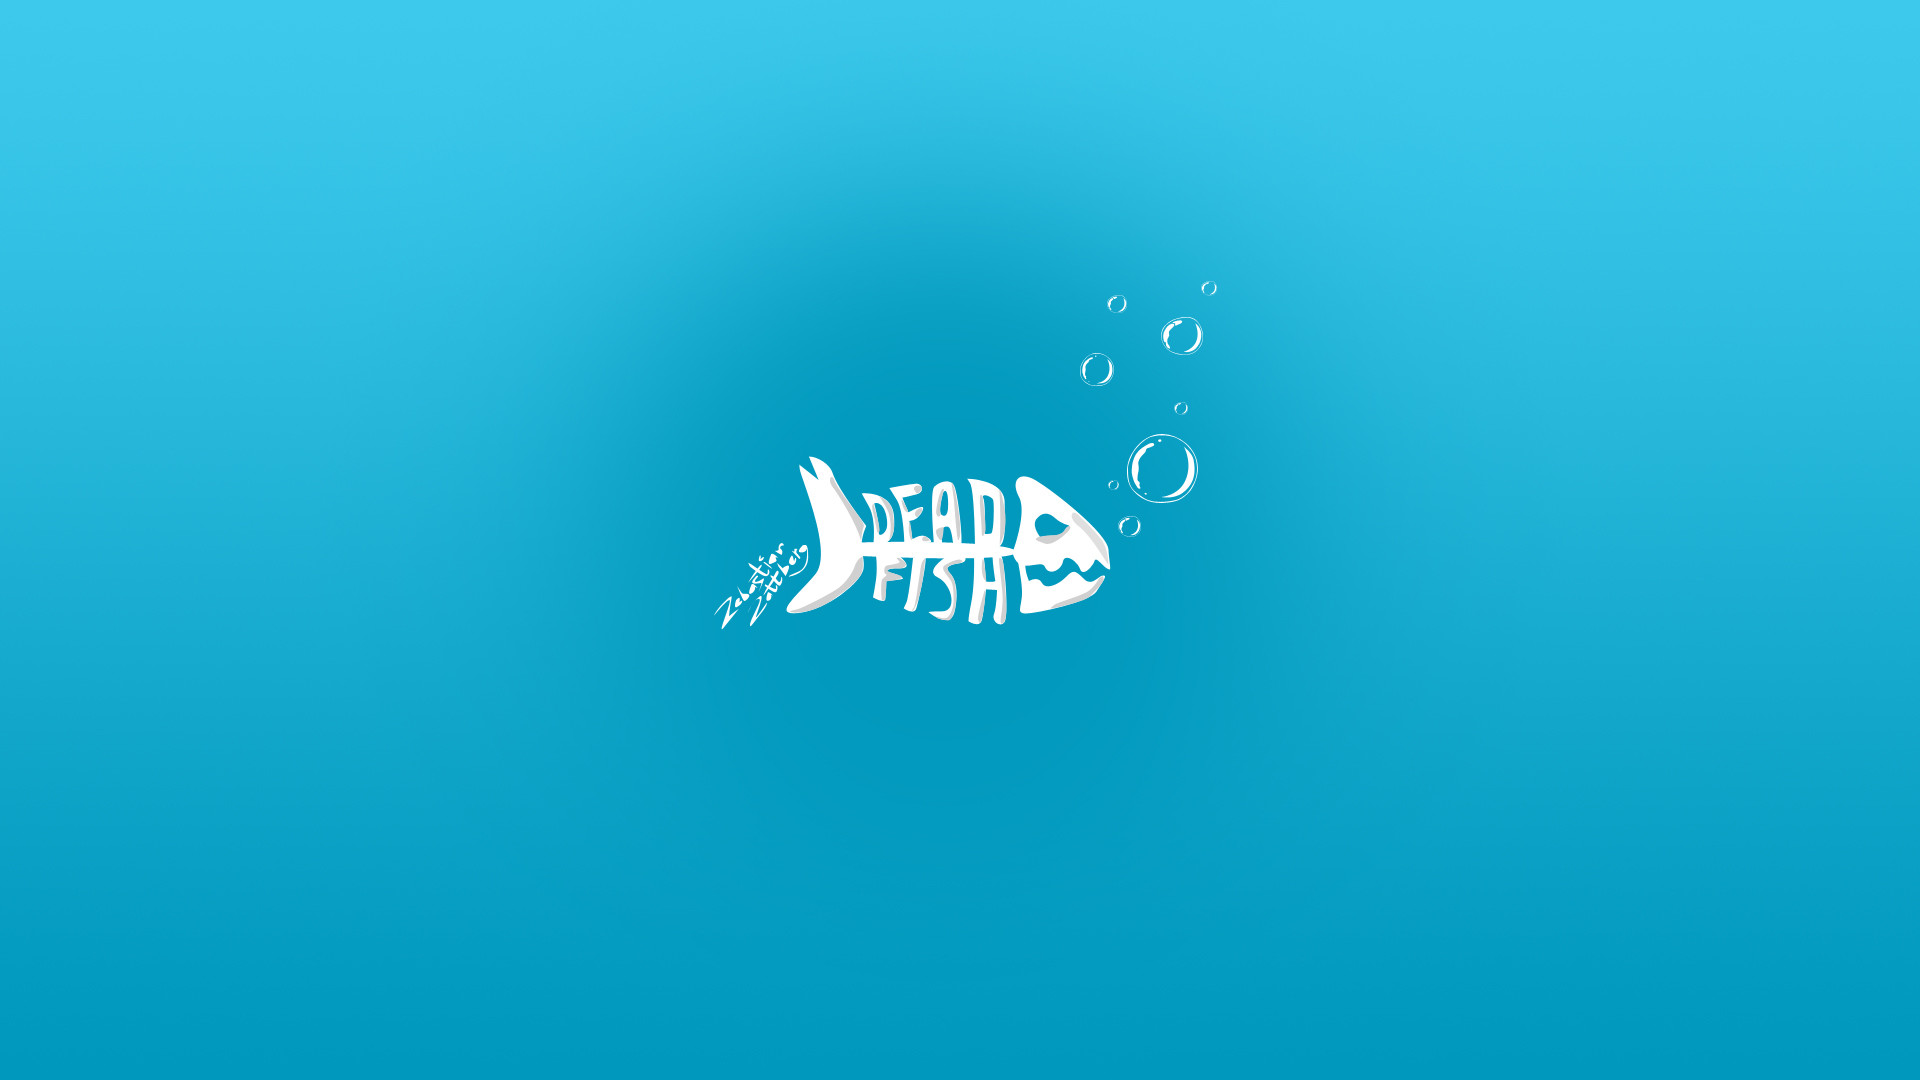 1920x1080 ... -Dead Fish- by greenpuddle